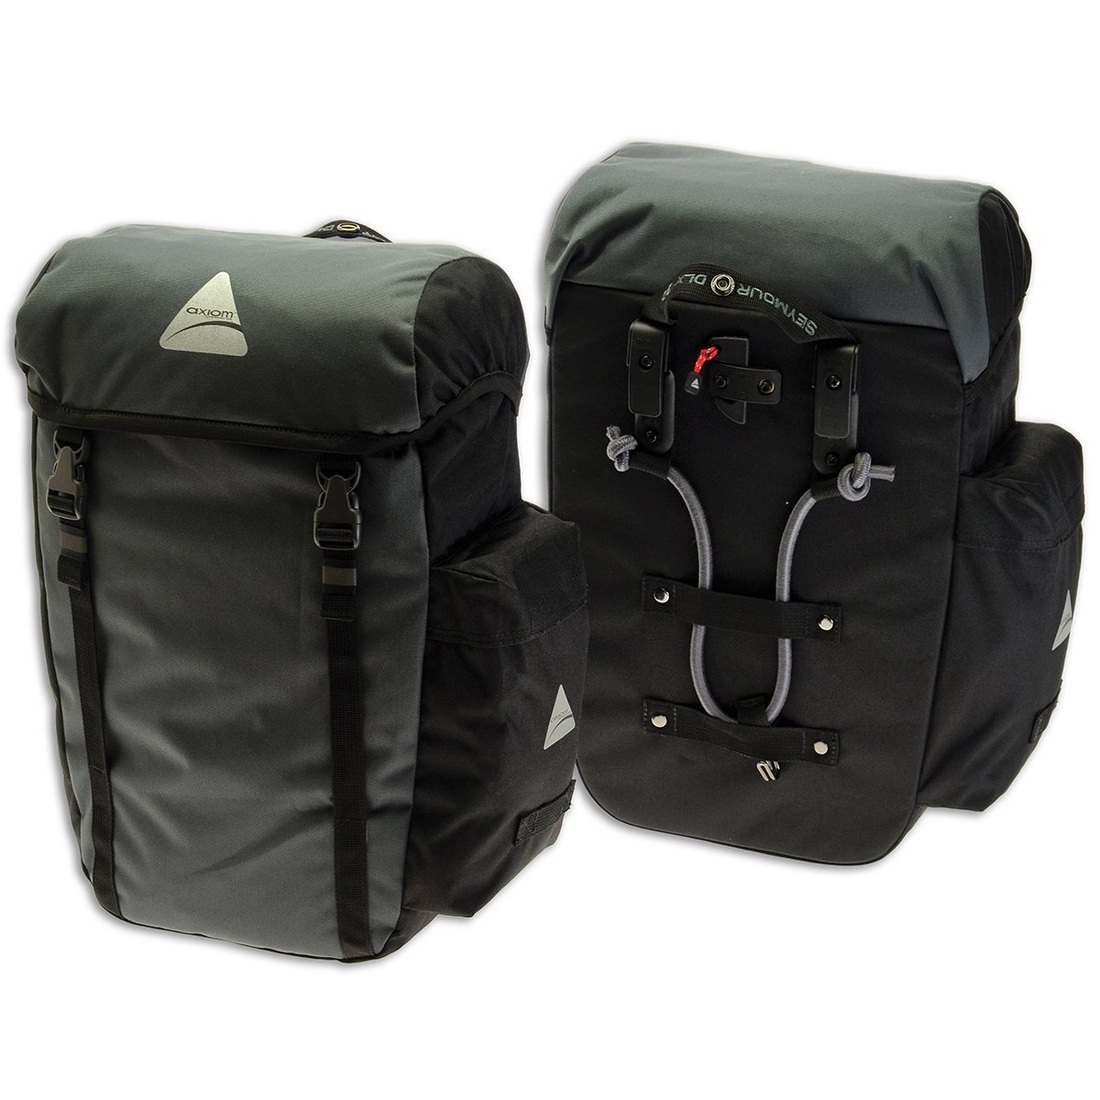 Picture of Axiom Seymour DLX 20 Panniers for bike touring and commuting